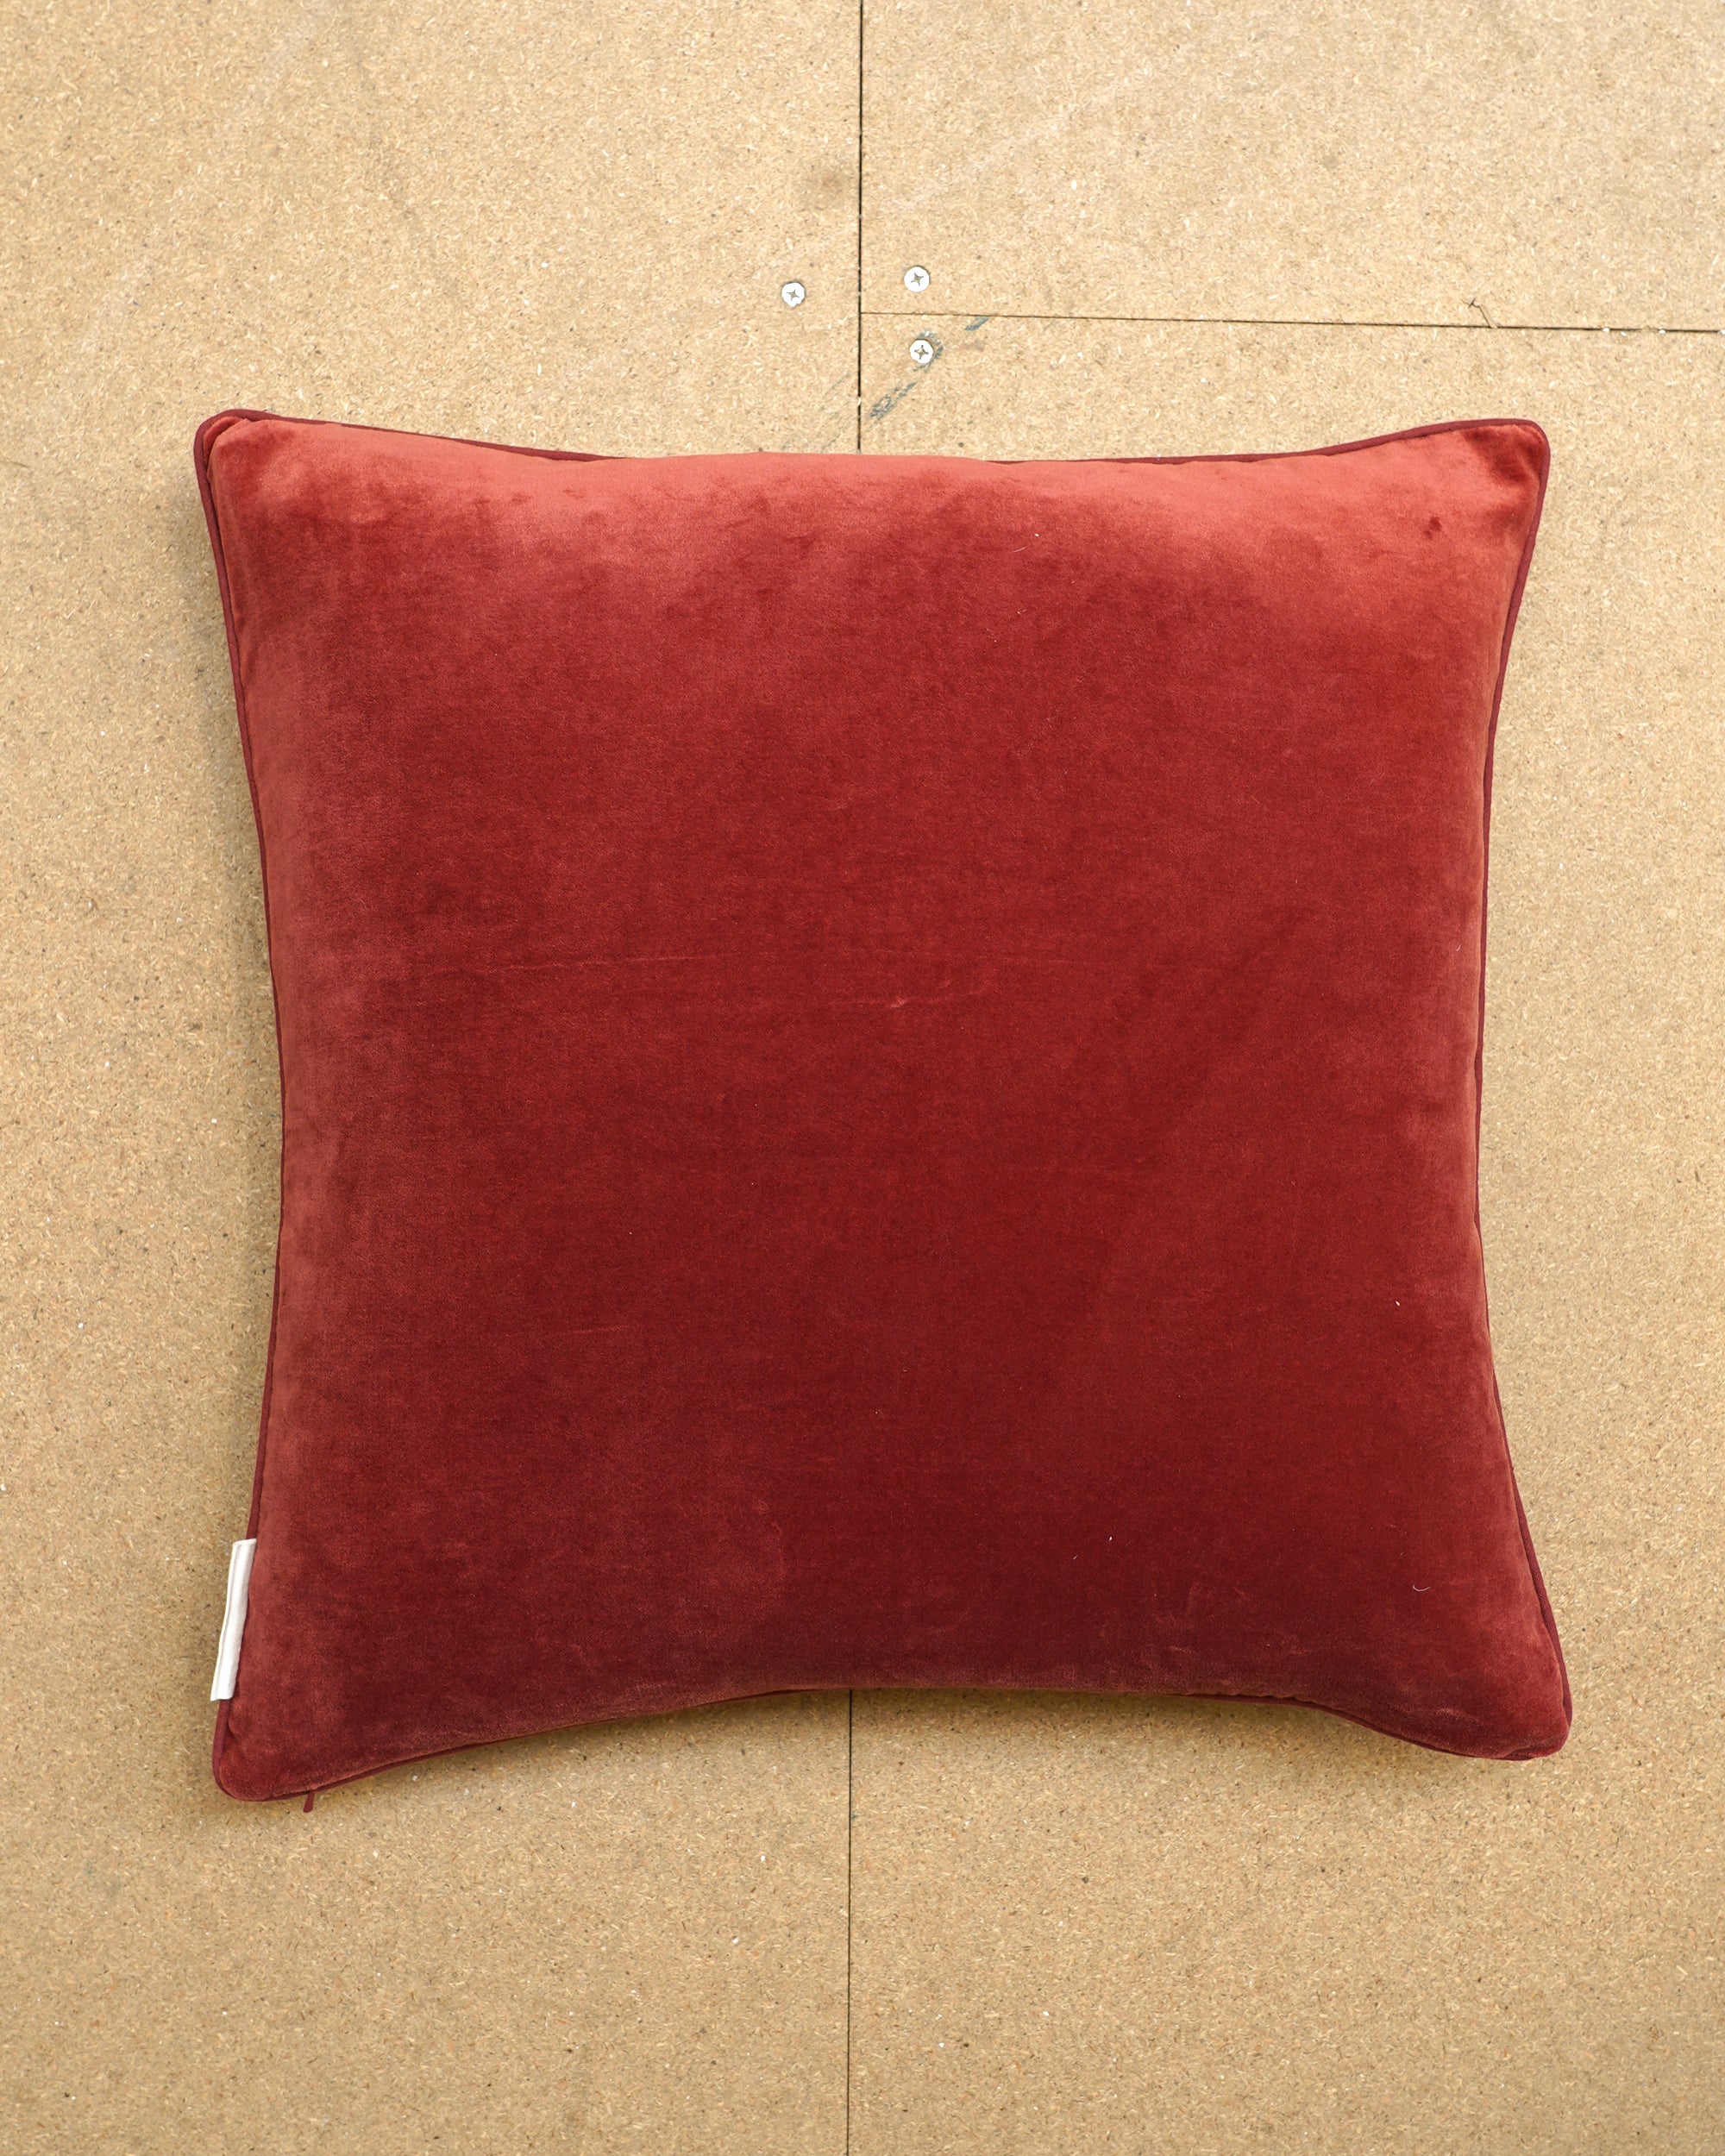 Woven Horizontal Stripe Square Cushion - Russet Red